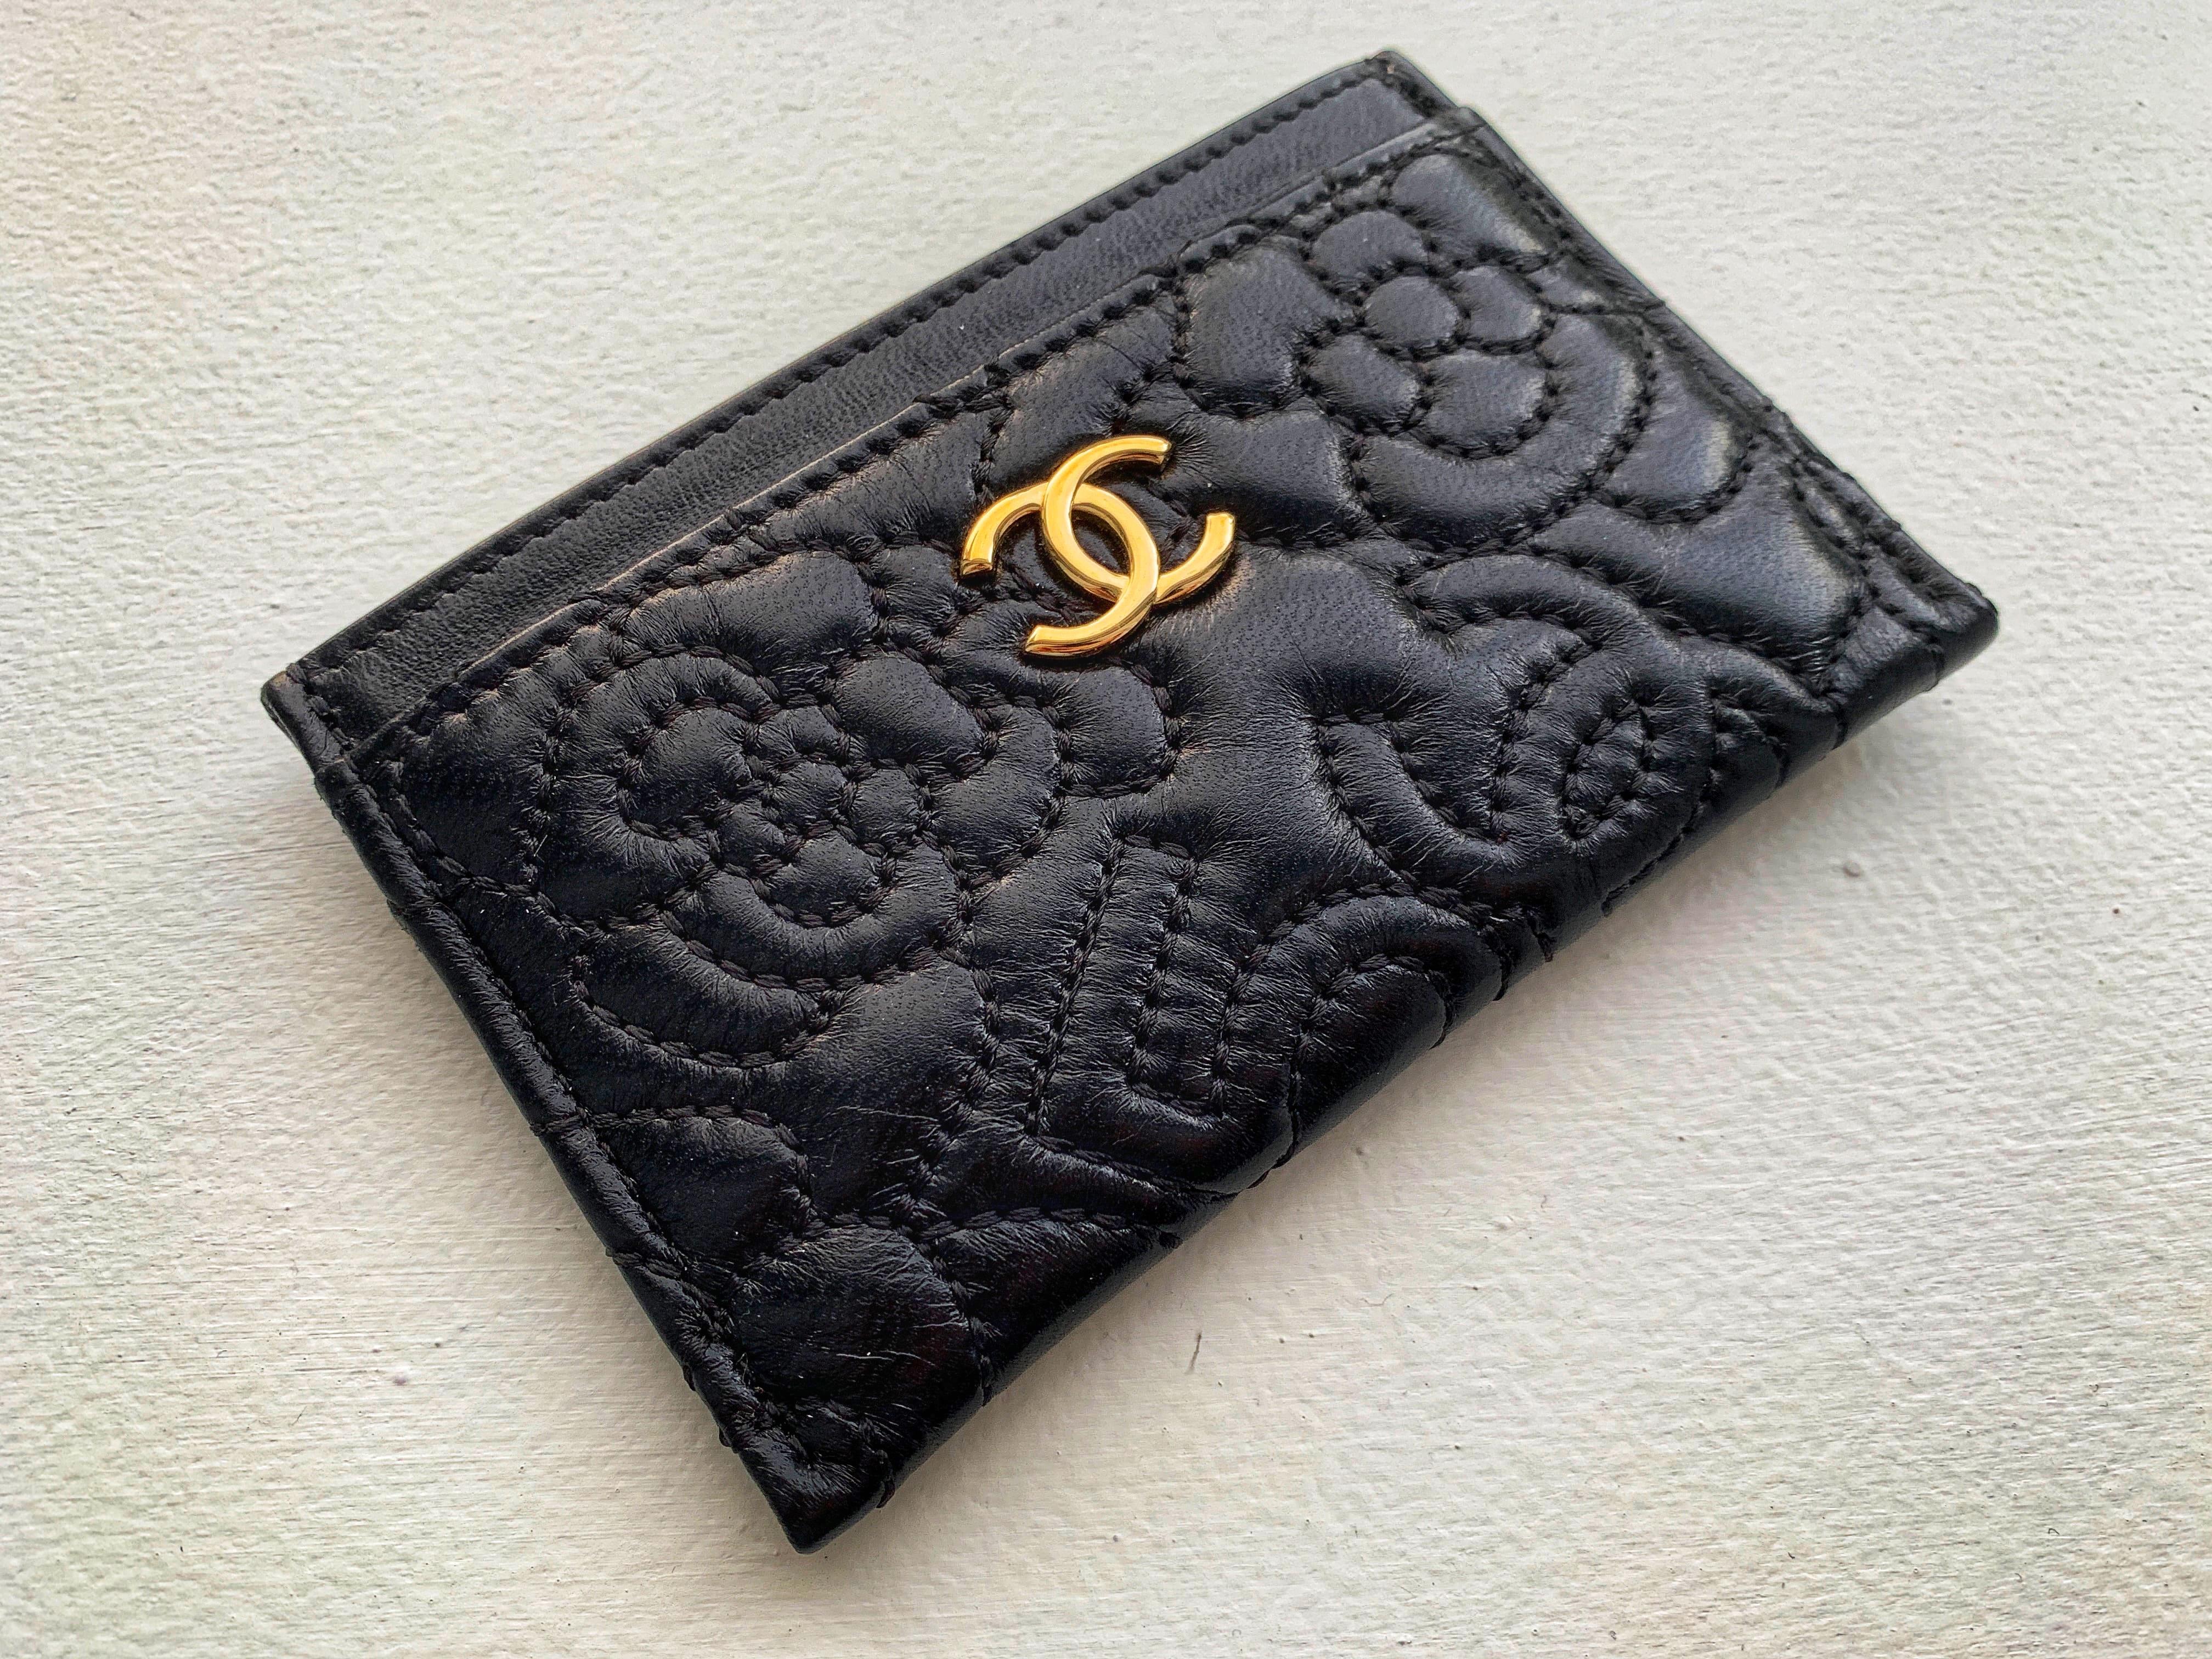 Accessories to look stylish at work: Chanel card holder (review) - Poli  Arias - Brand, Image and Etiquette